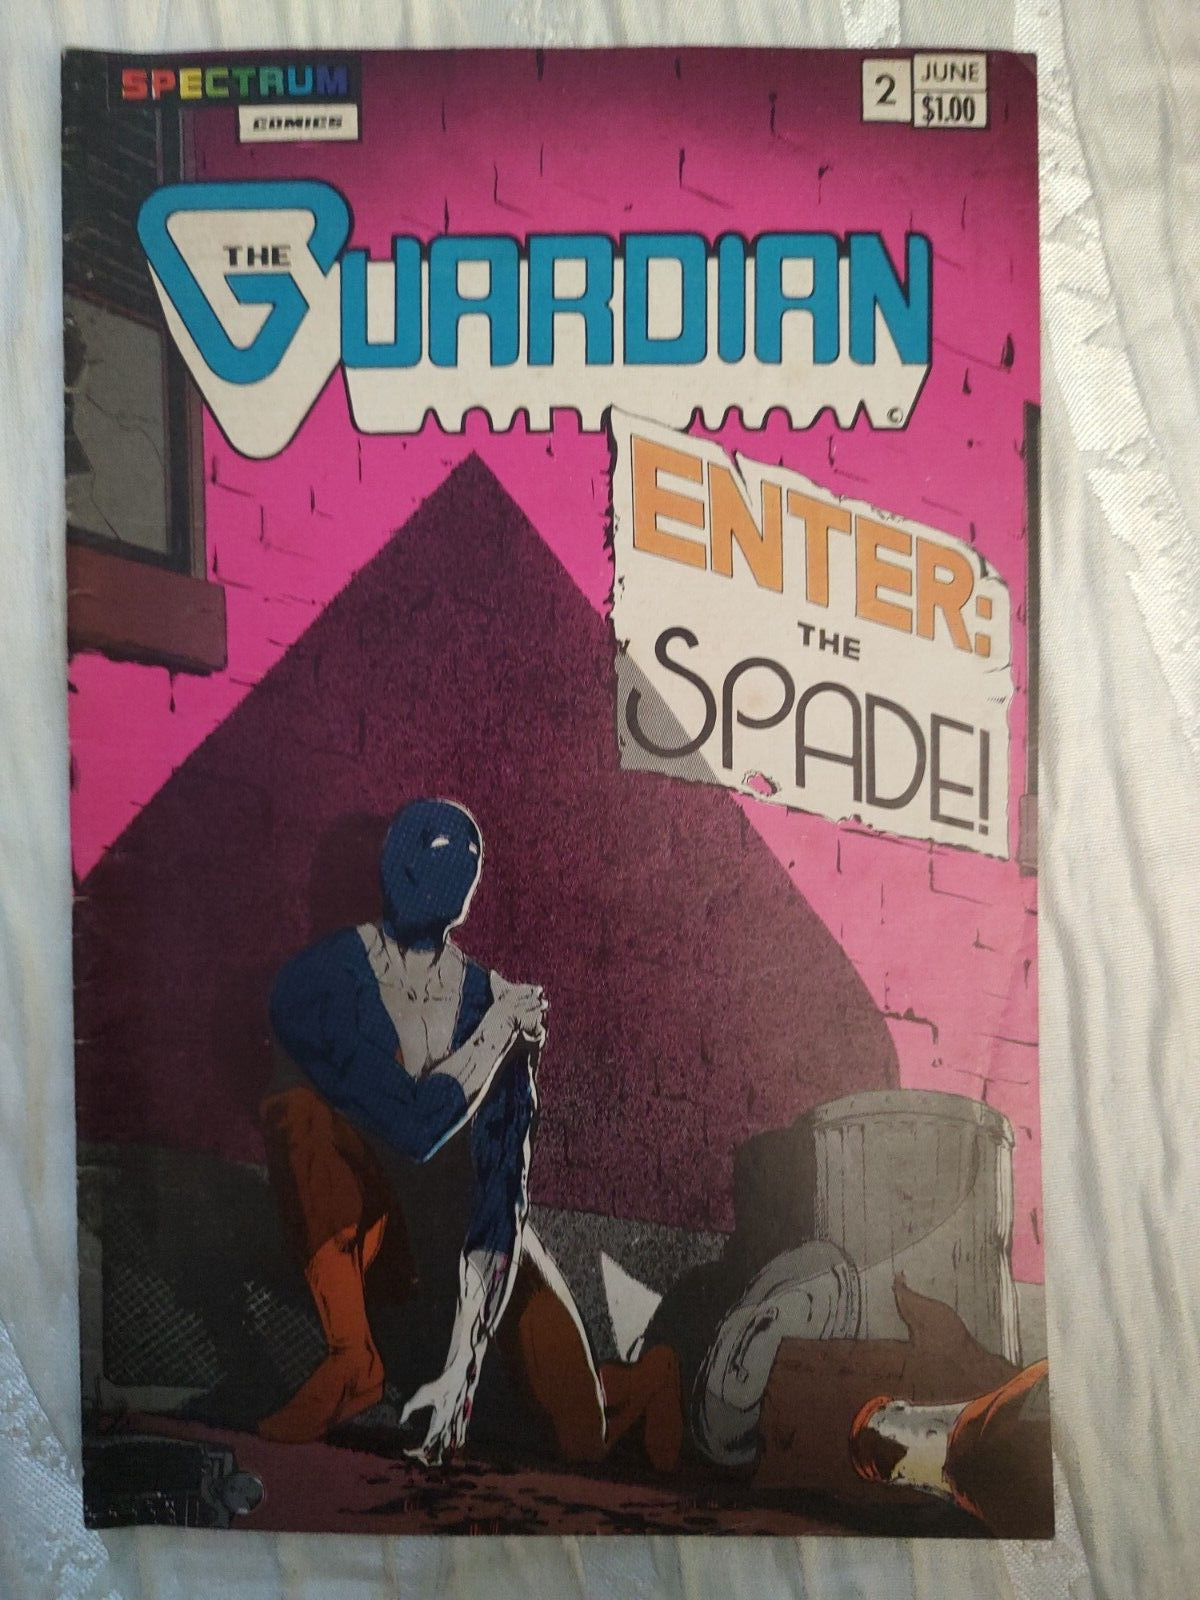 Cb26~comic book~rare the guardian enter the spade issue #2 June